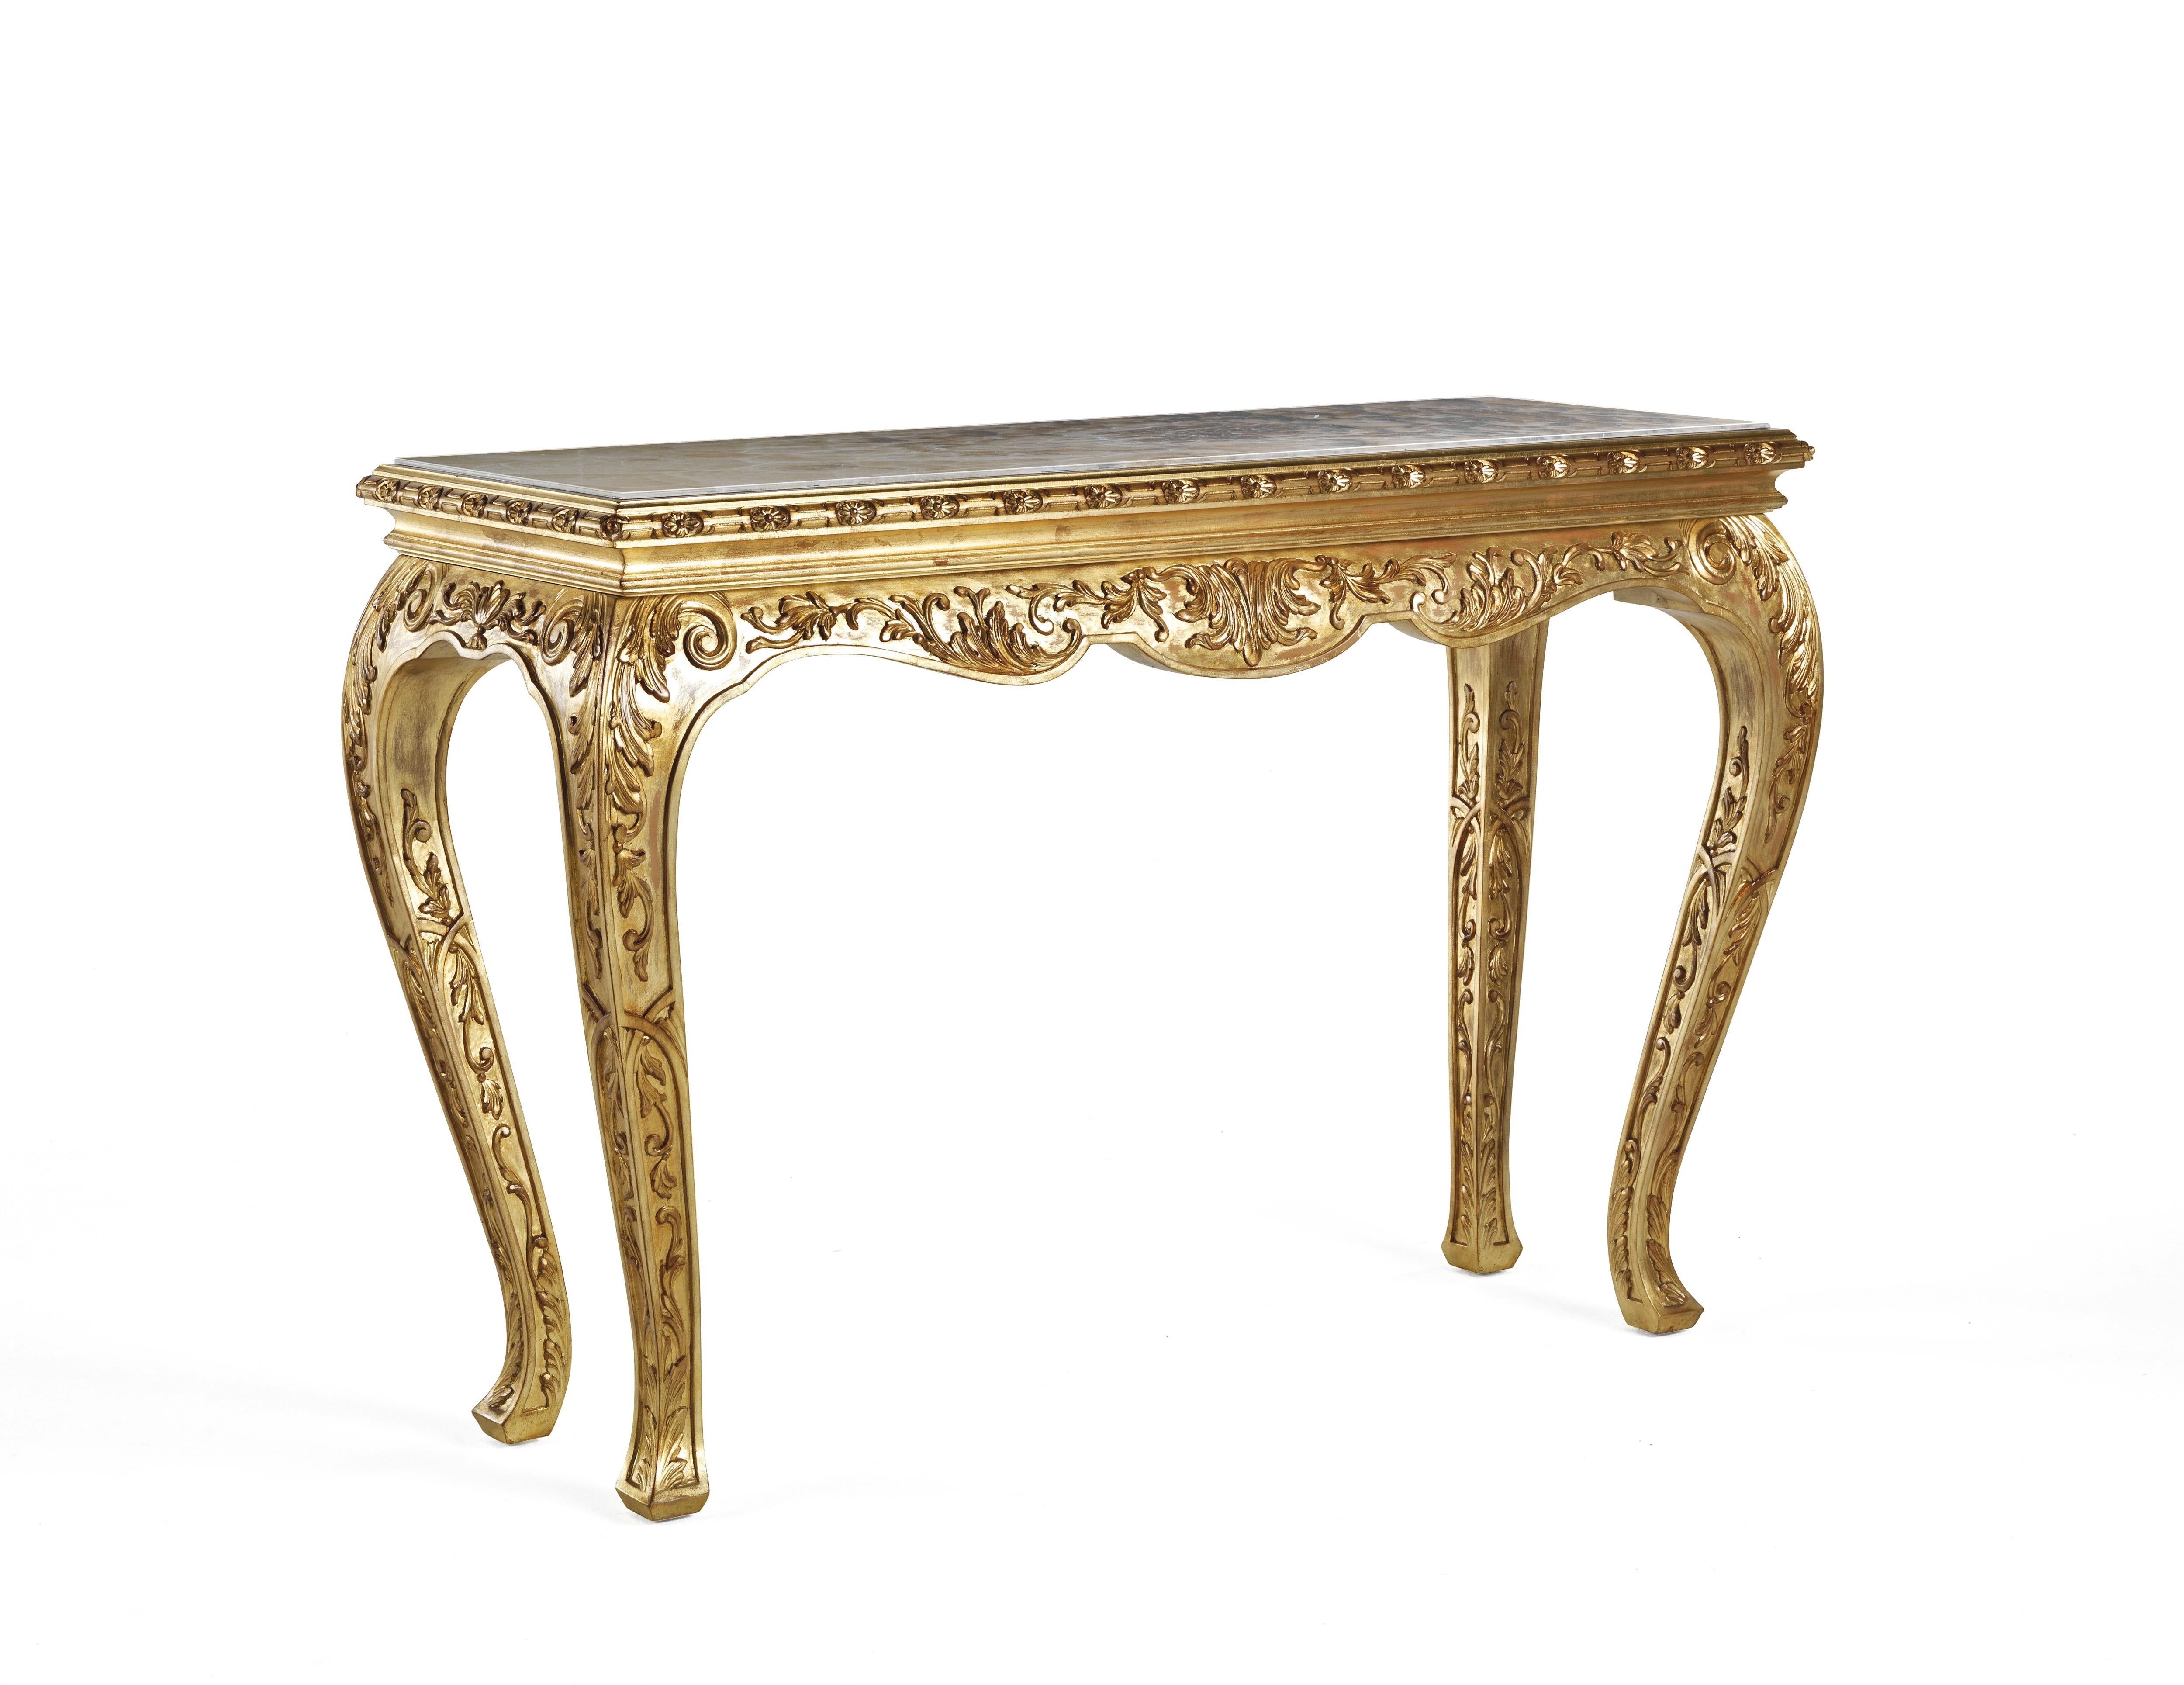 Fragonard line expresses Jumbo Collection’s design approach, where artisanal heritage, decorative and experimentation in the use of materials, techniques and processes meet. In the console, the Baroque-style base with carvings in low relief and a